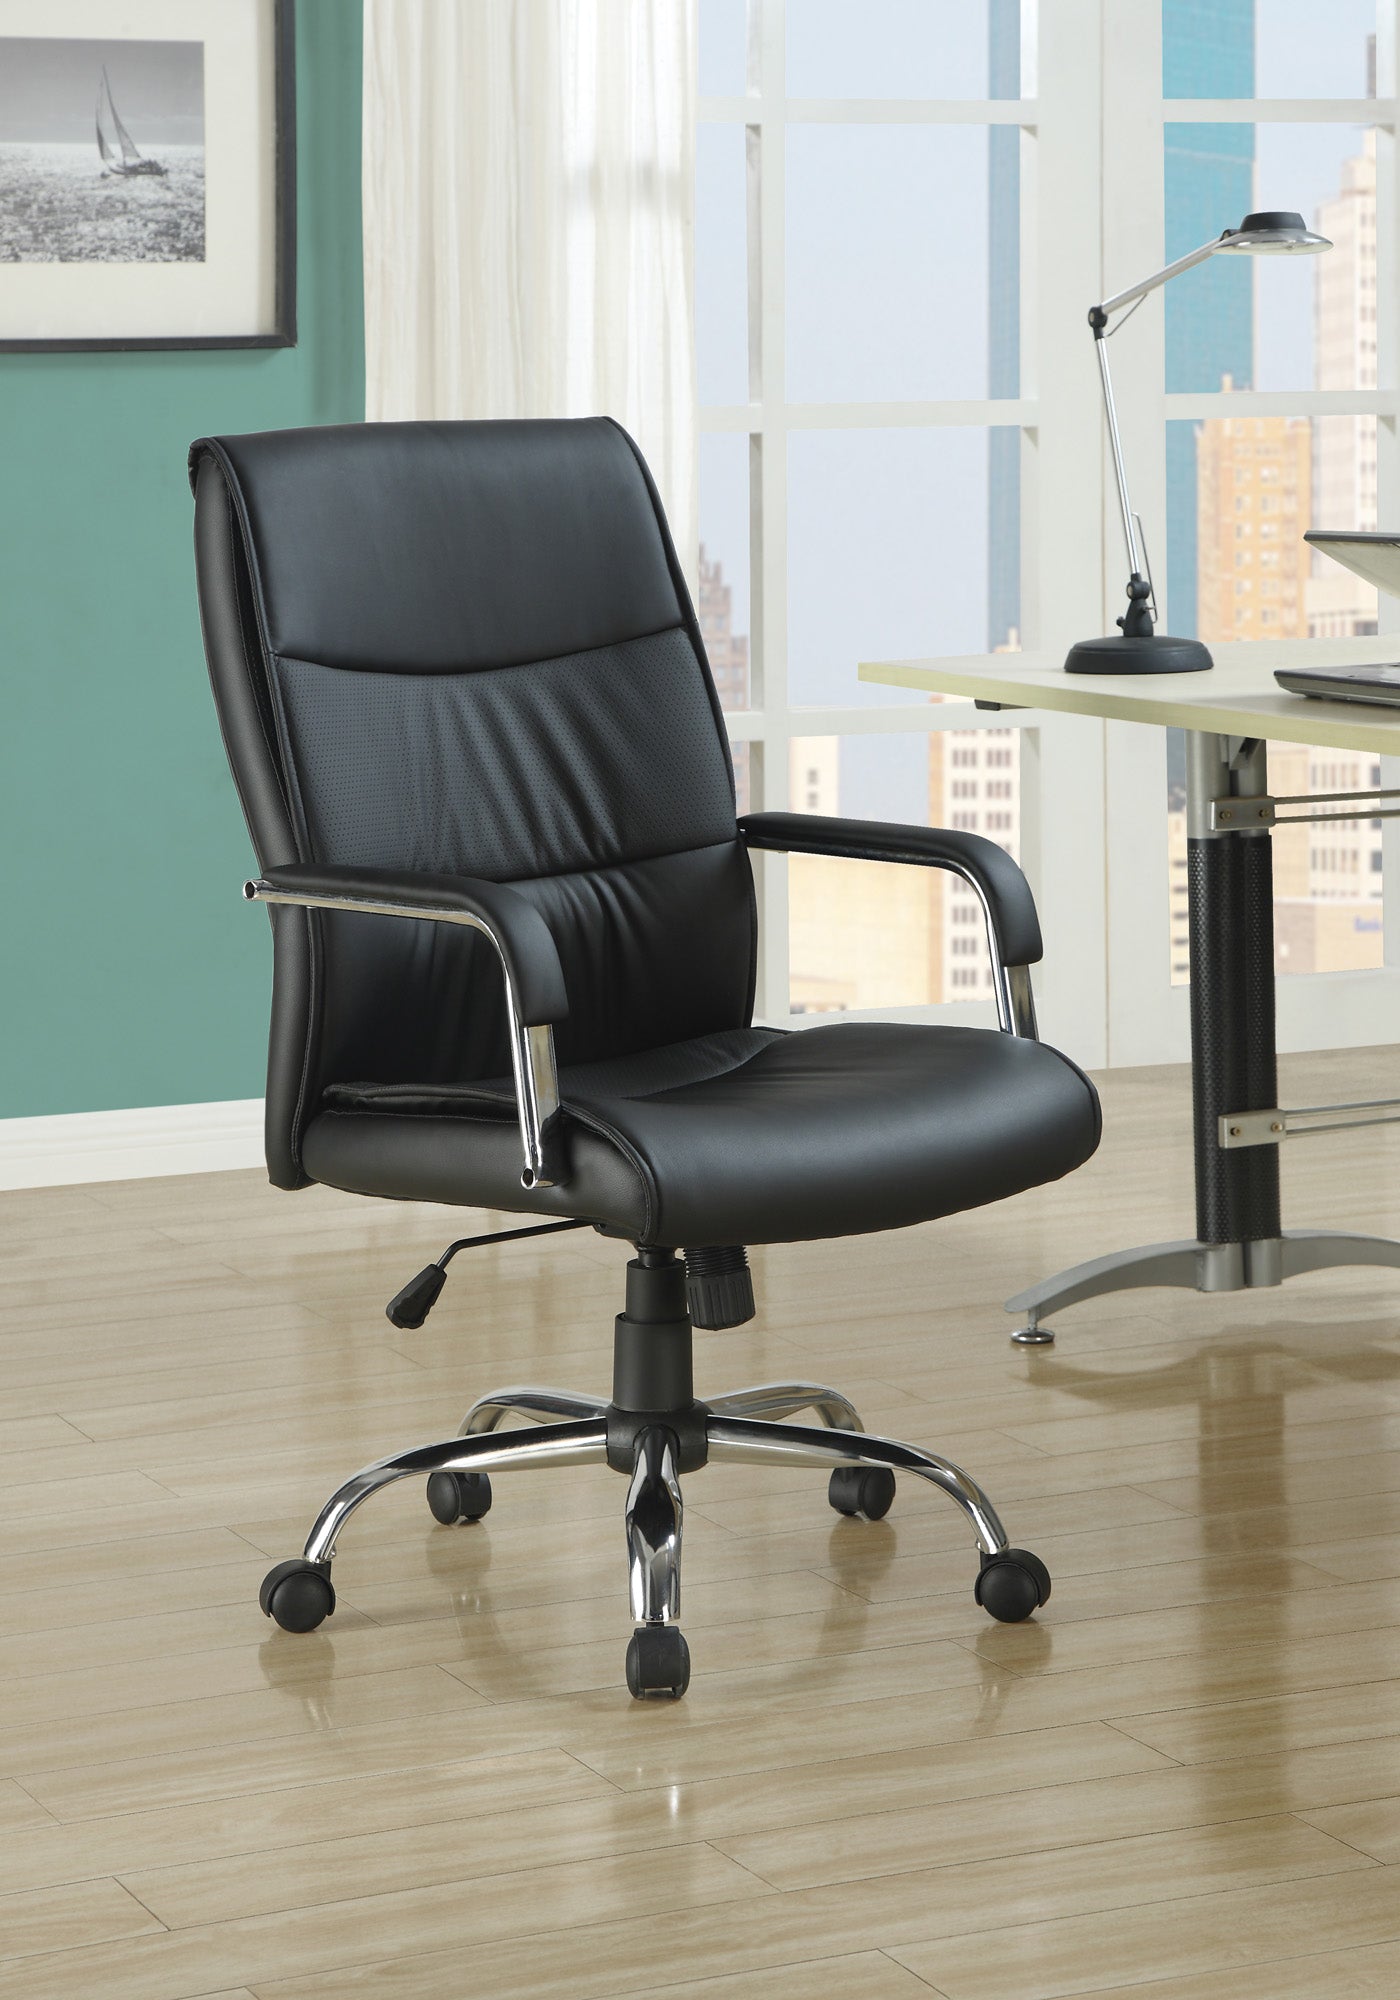 office chair black leather look fabric i4290